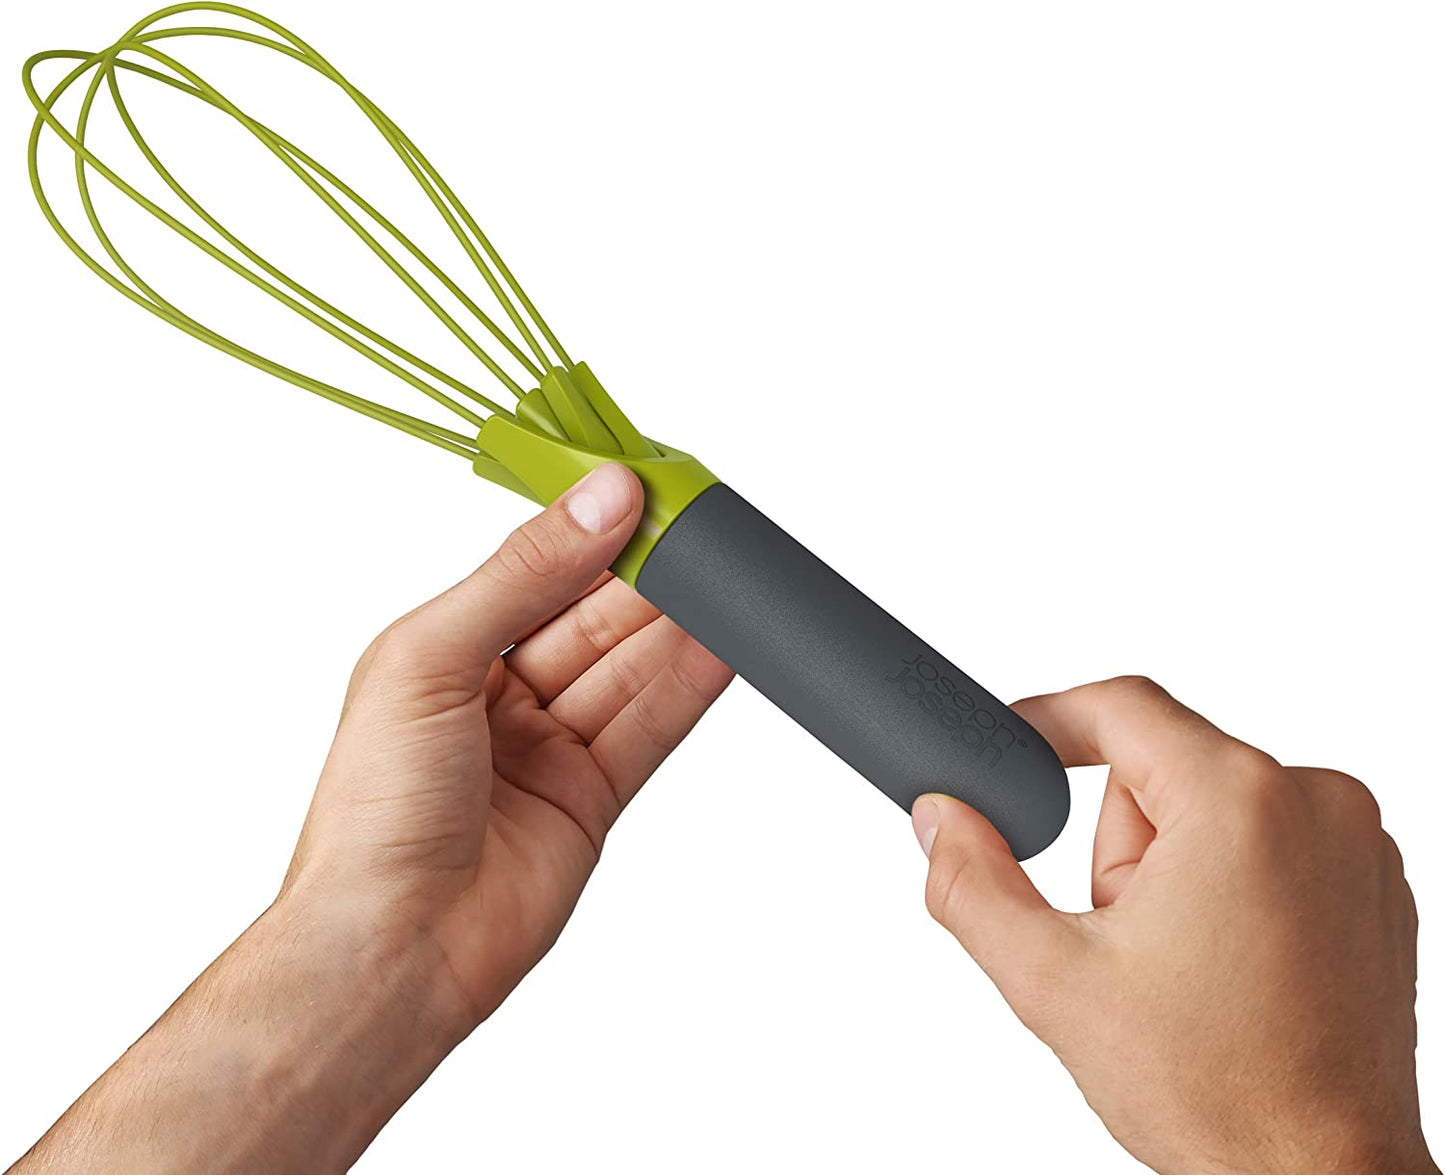 2-In-1 Collapsible Balloon and Flat Whisk Silicone Coated Steel Wire, Gray/Green